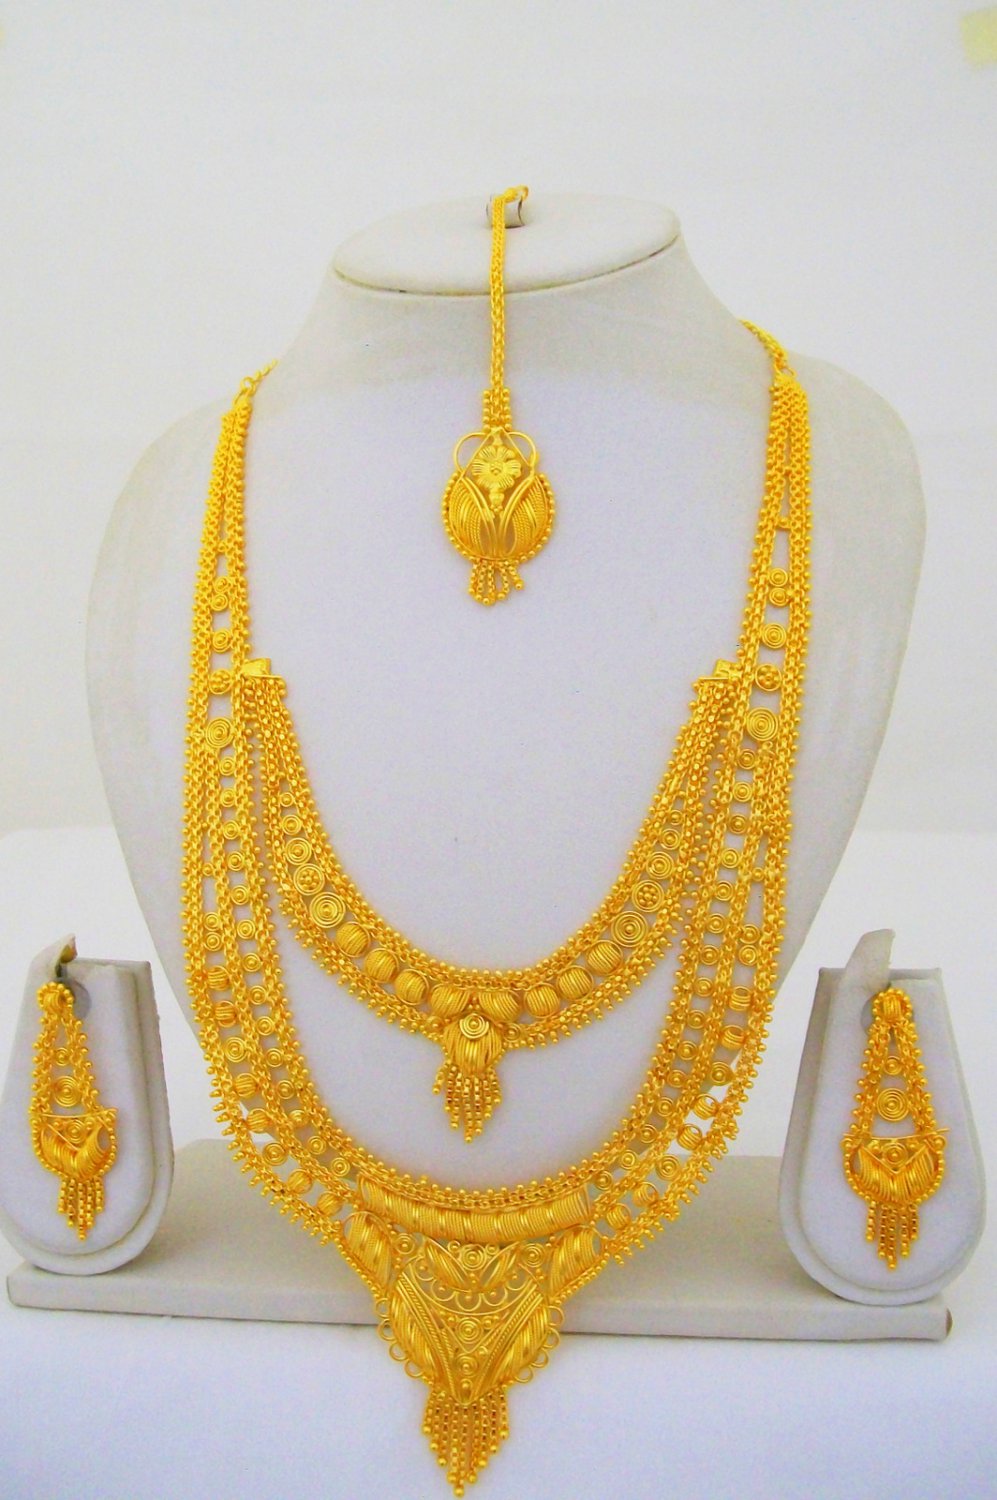 Gold Plated Indian Rani Haar Necklace Long Filigree Layered Bridal Jewelry Set